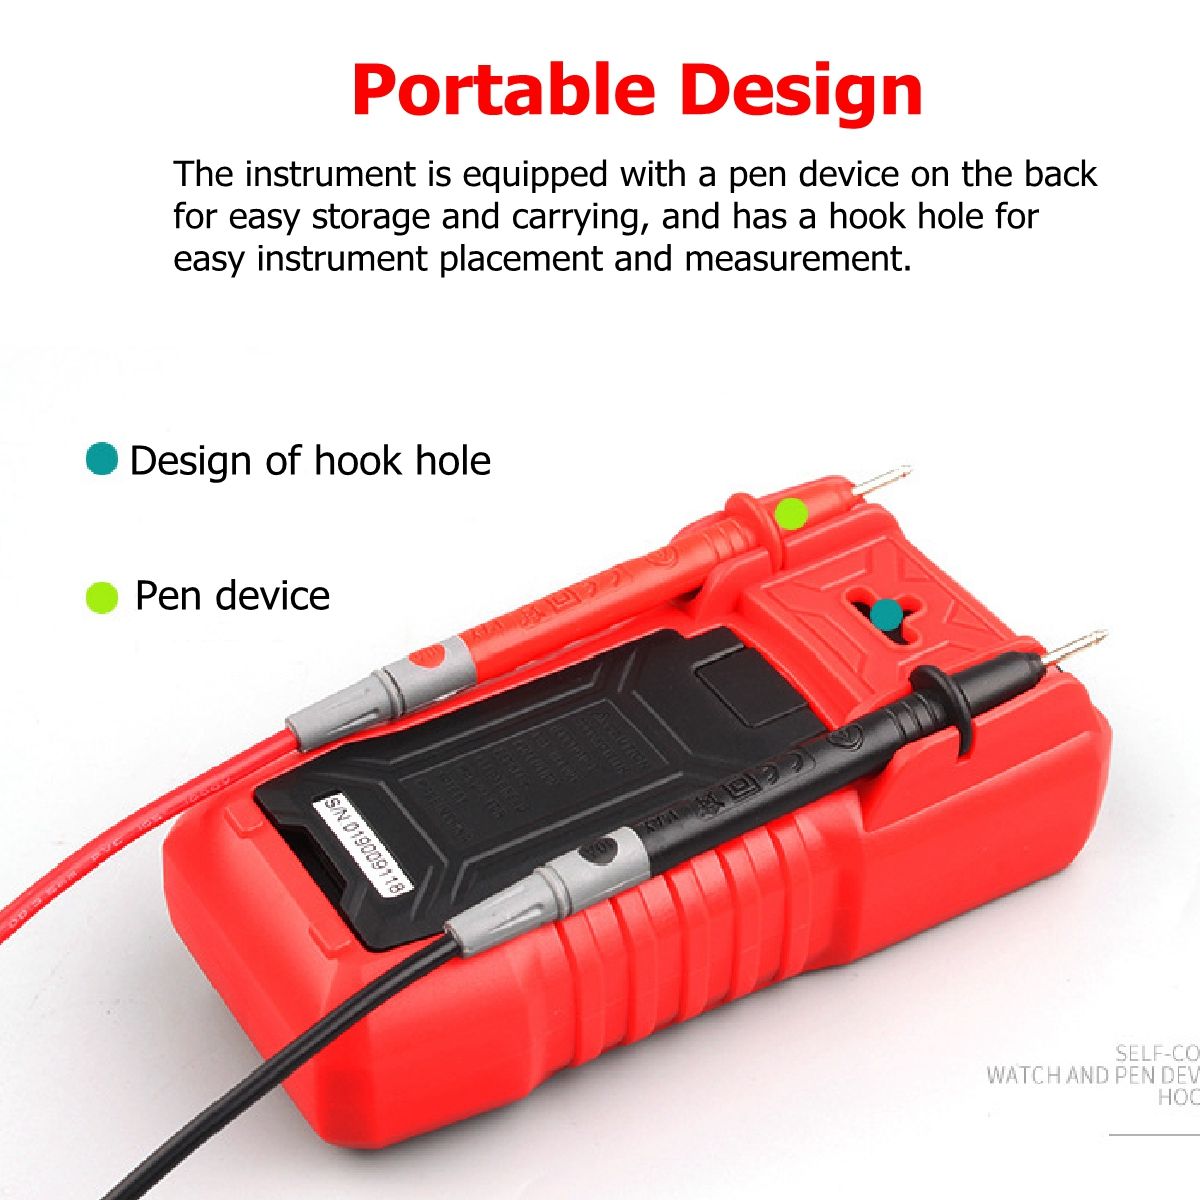 TA801A-Multimeter-High-Precision-Manual-Digital-Ammeter-Table--AC-and-DC-Universal-Multifunction-1530115